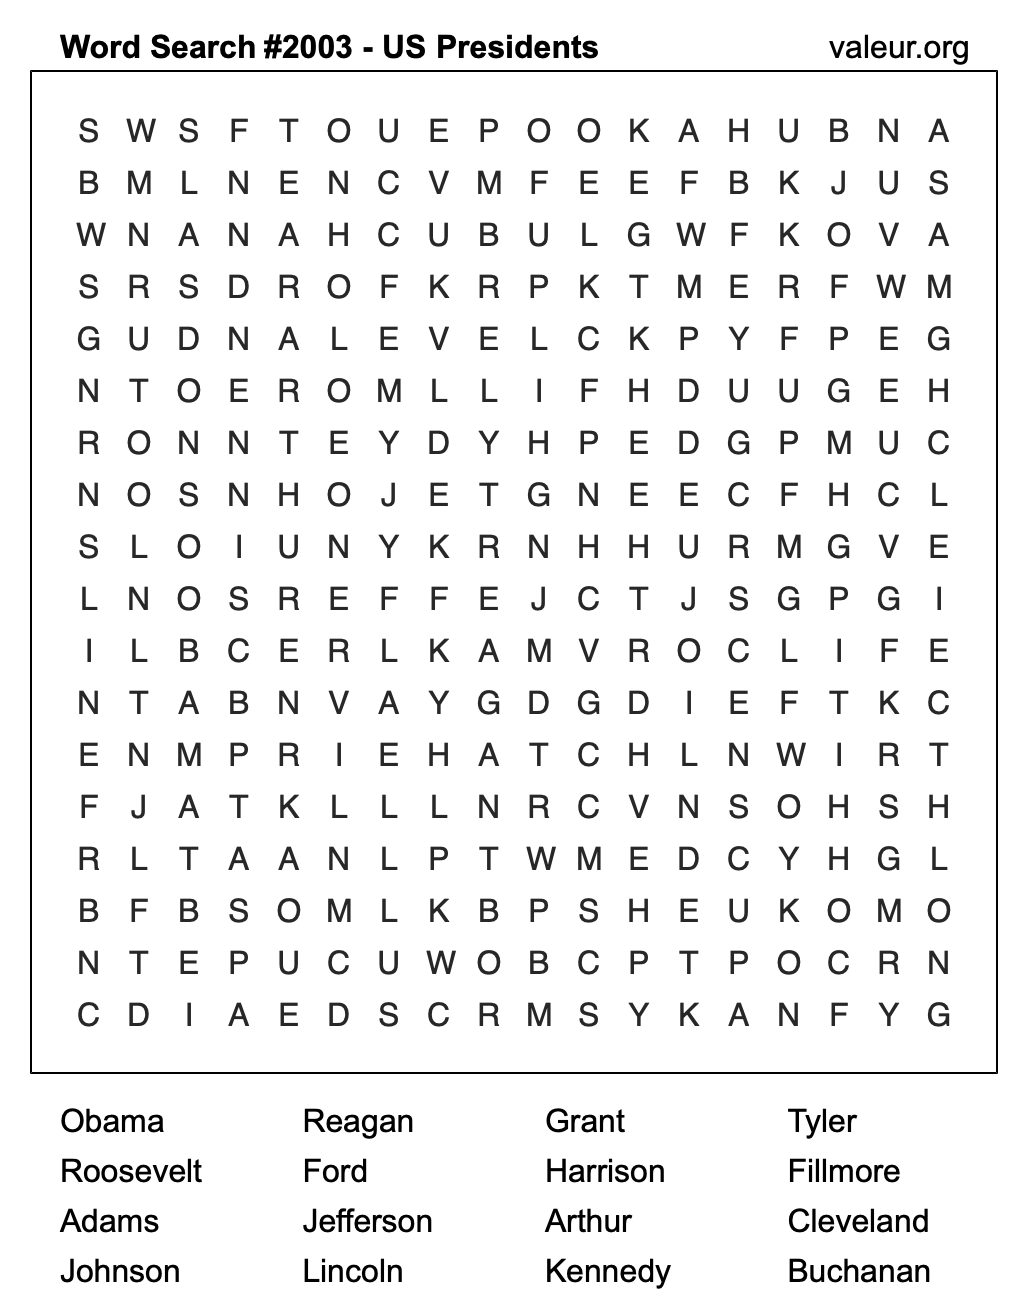 Word Search Puzzle with US Presidents #2003